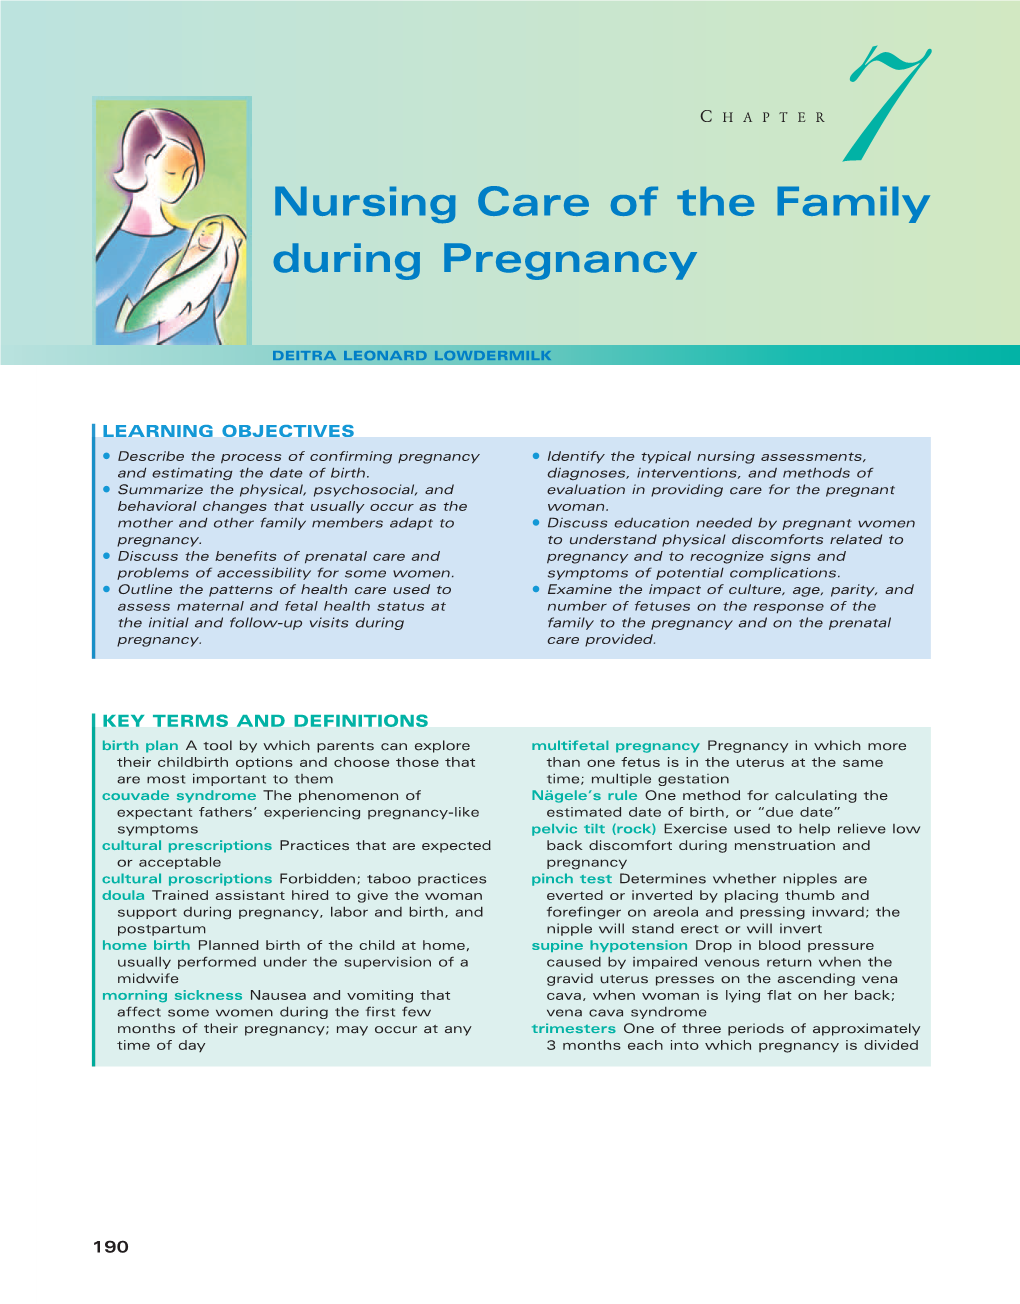 Nursing Care of the Family During Pregnancy 191